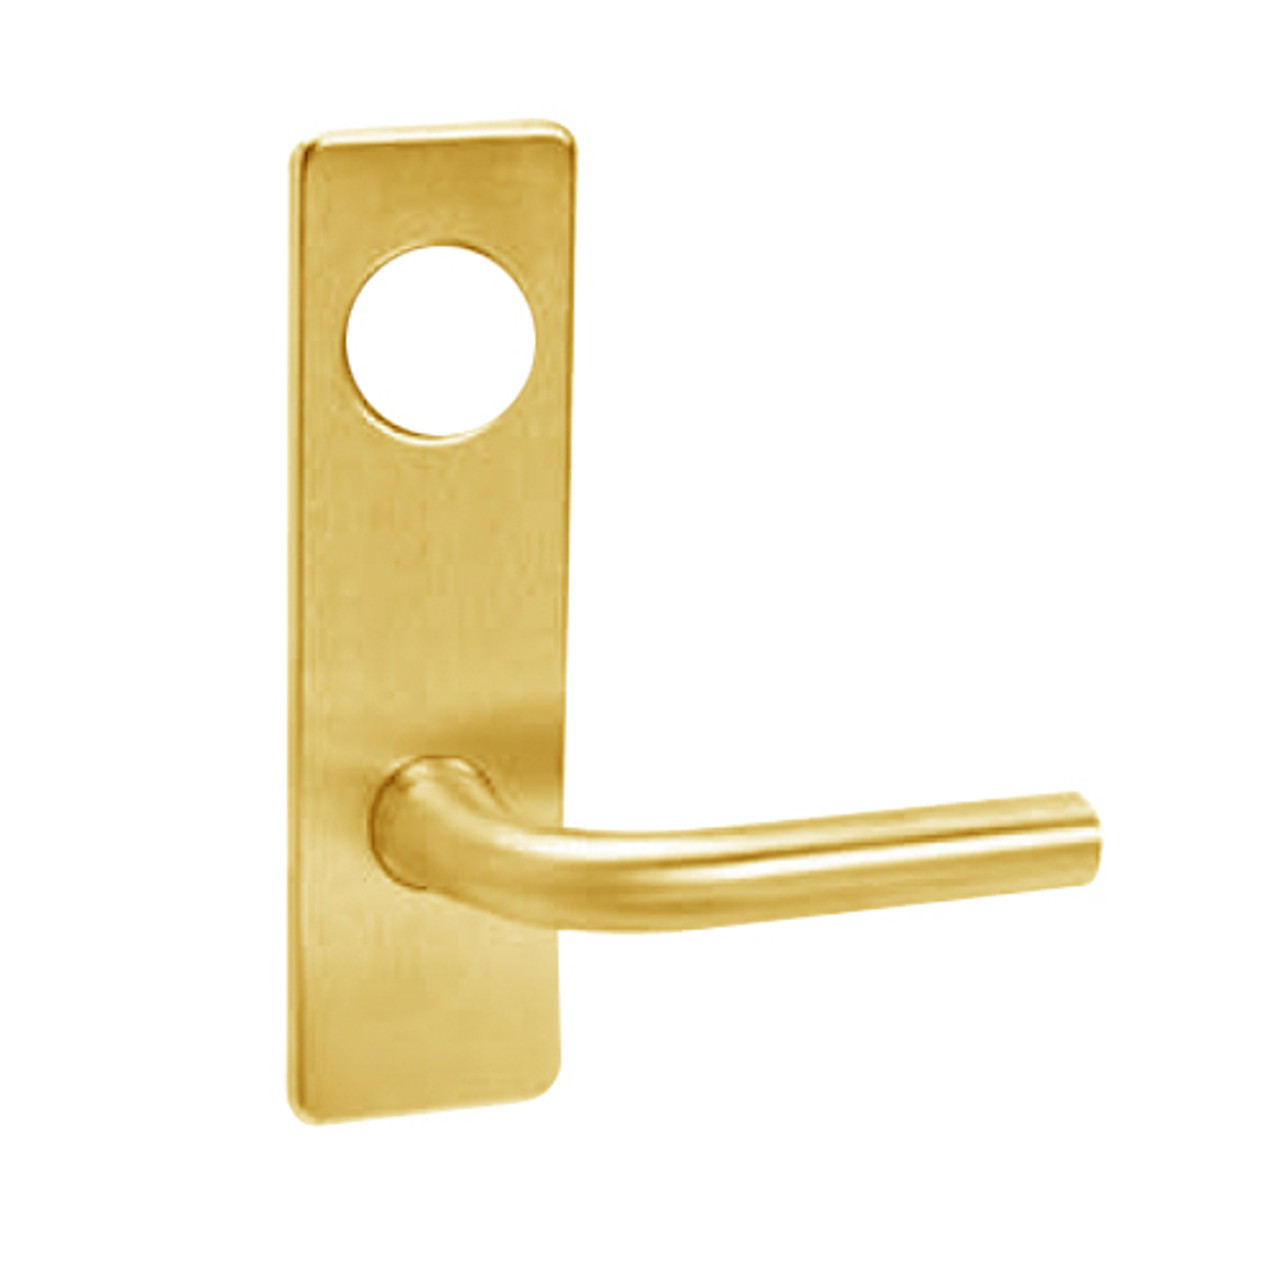 ML2042-RSM-605-CL6 Corbin Russwin ML2000 Series IC 6-Pin Less Core Mortise Entrance Locksets with Regis Lever in Bright Brass